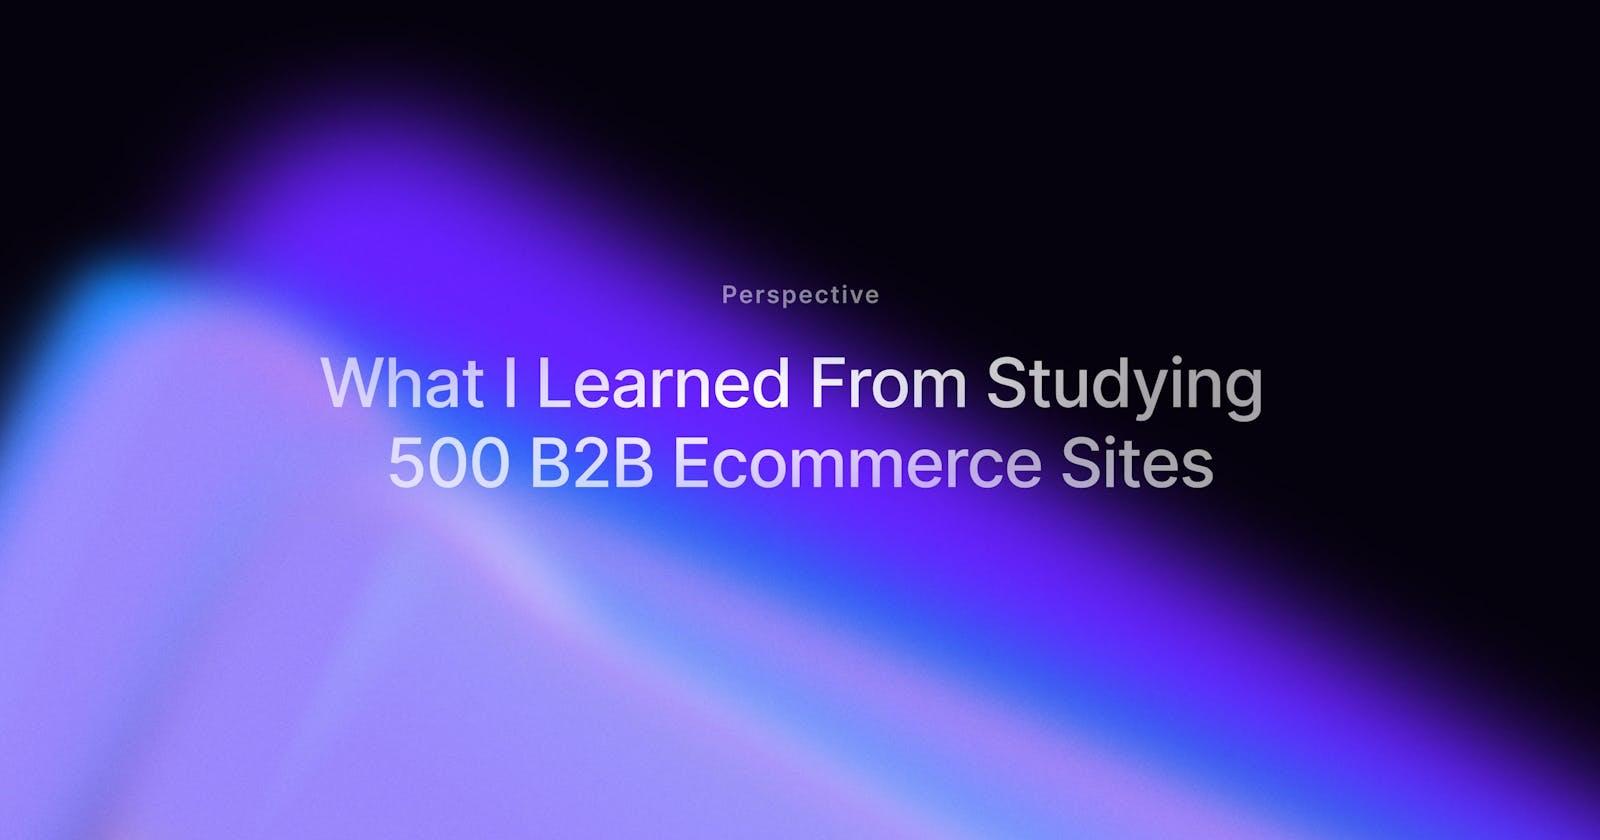 5 Tips for Product Categorization in B2B Ecommerce